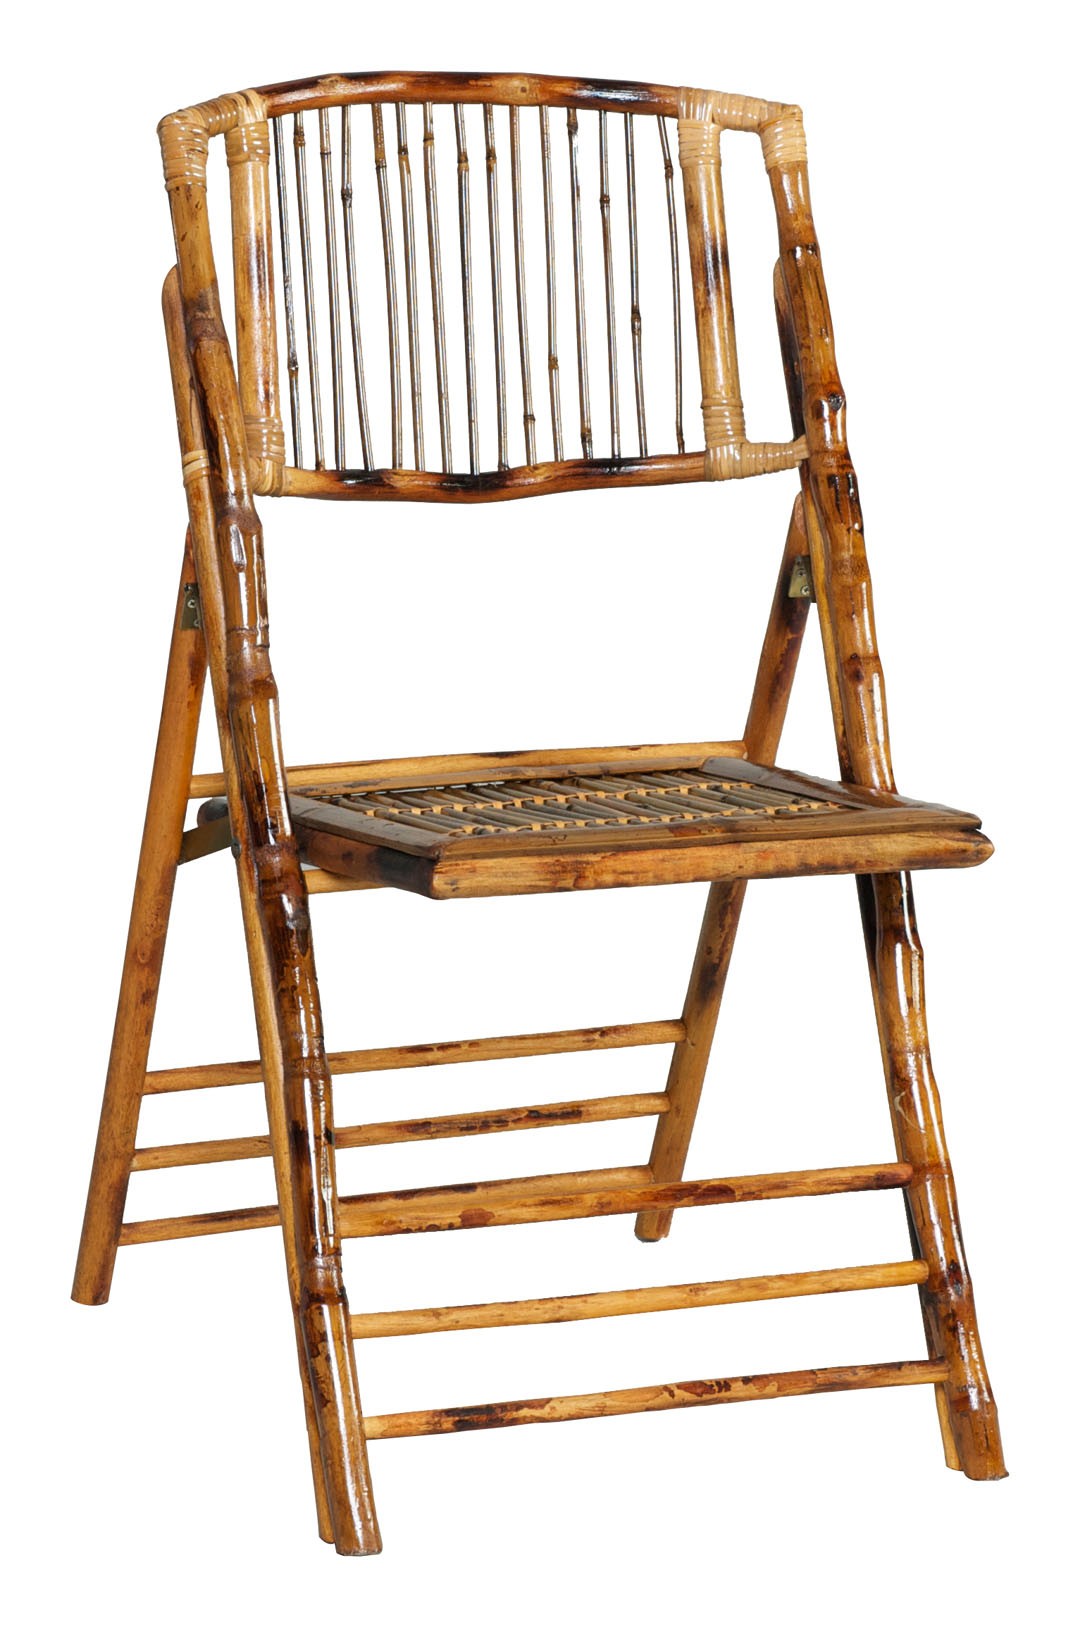 Bamboo chair - Frank and Joy